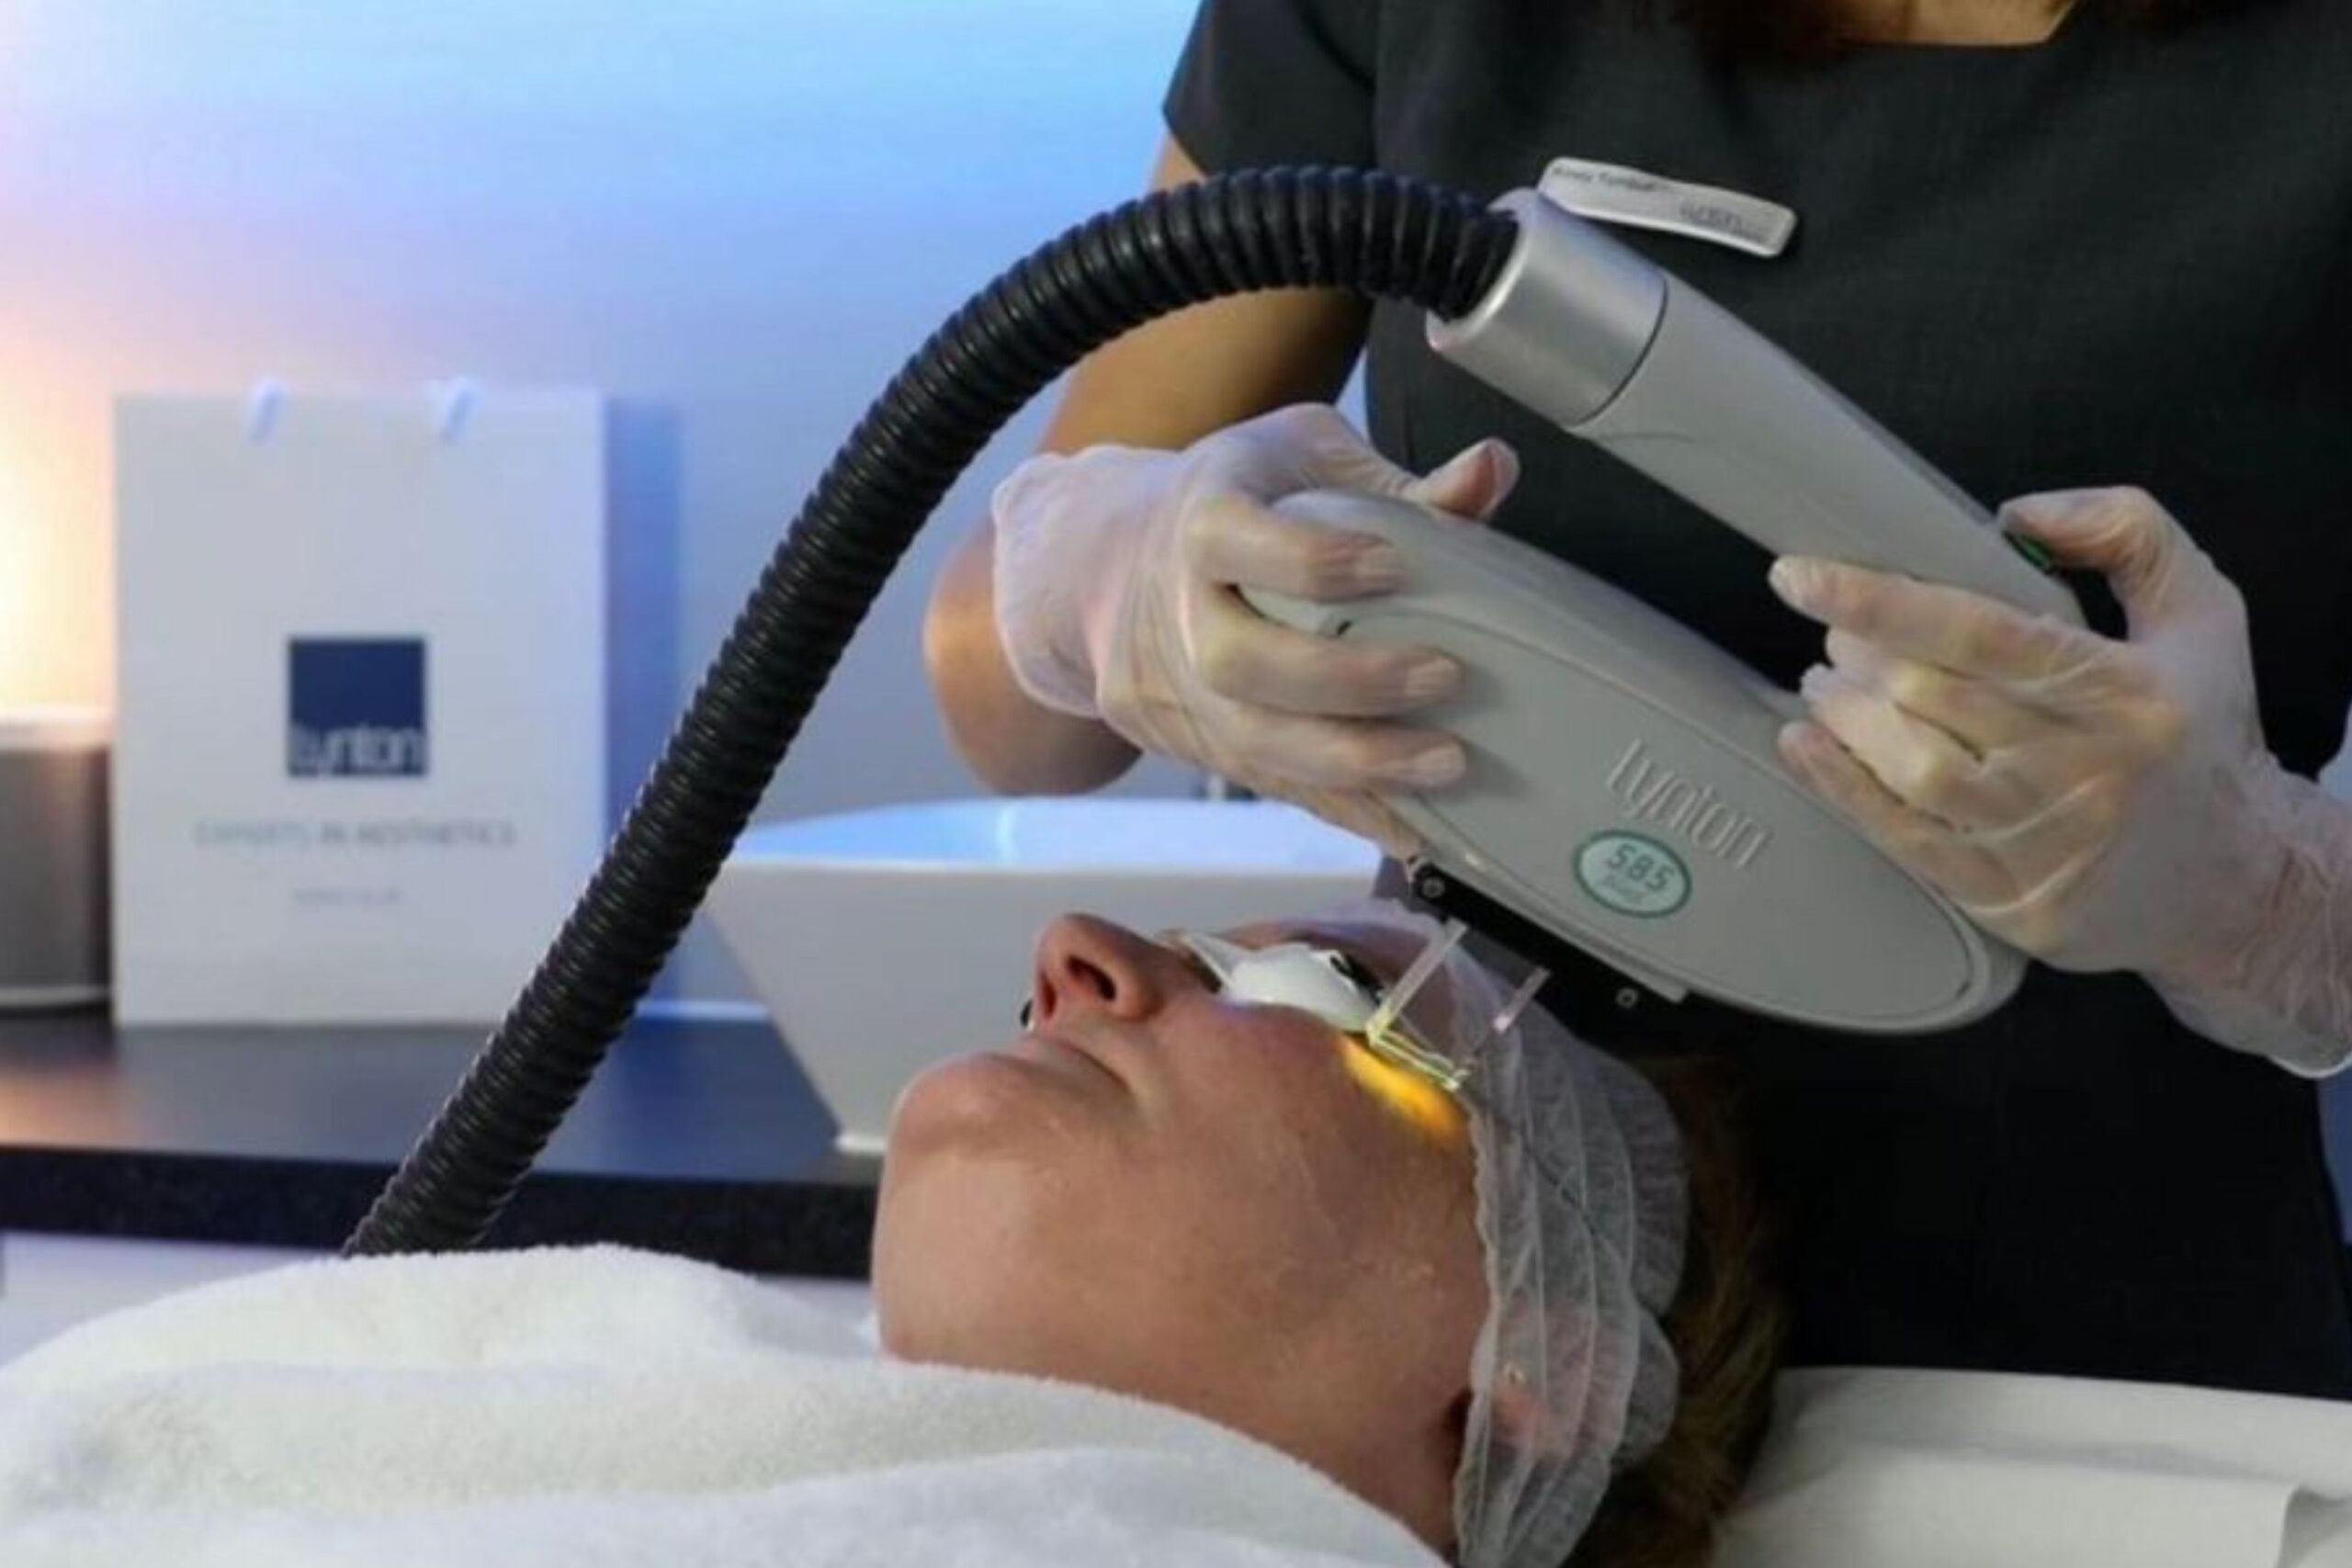 Photofacial for dull skin at Freyja Medical in Wrexham, Nantwich and Cheshire